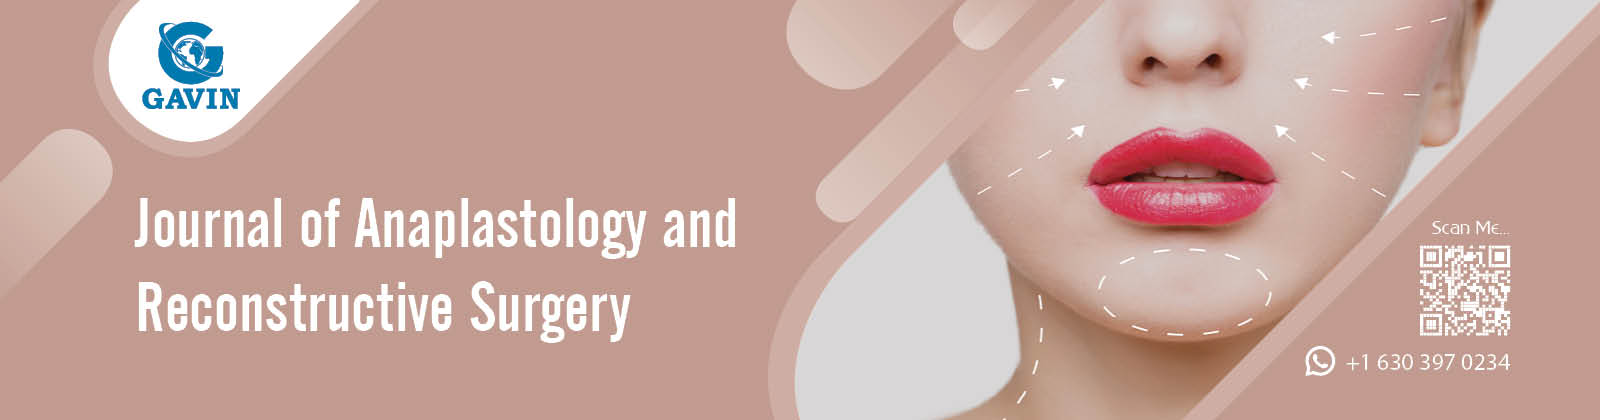 Journal of Anaplastology and Reconstructive Surgery